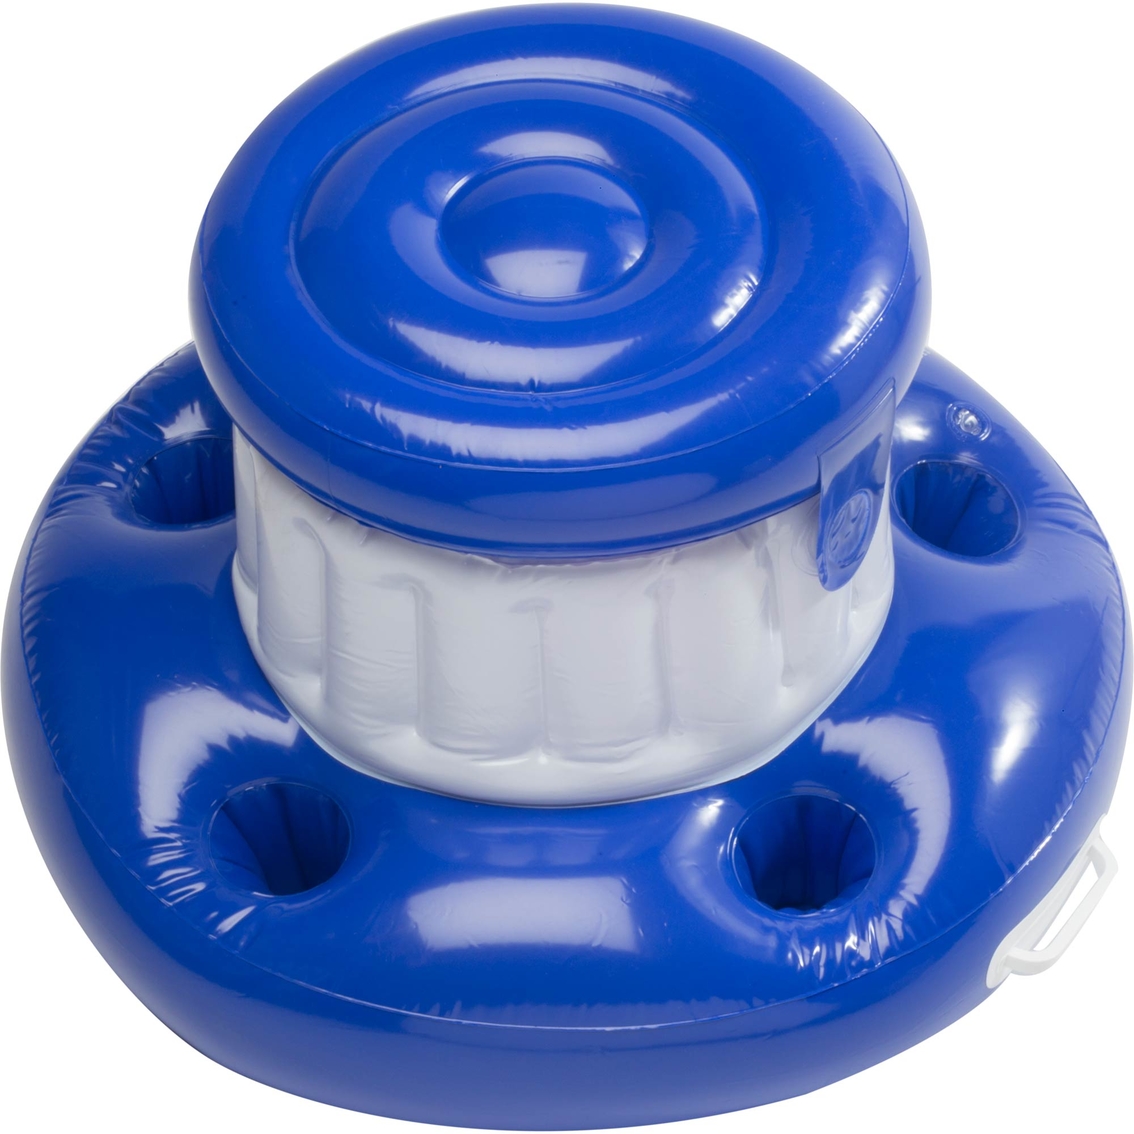 Ocean Blue Sun Searcher Chill Out Inflatable Floating Cooler - Image 2 of 3